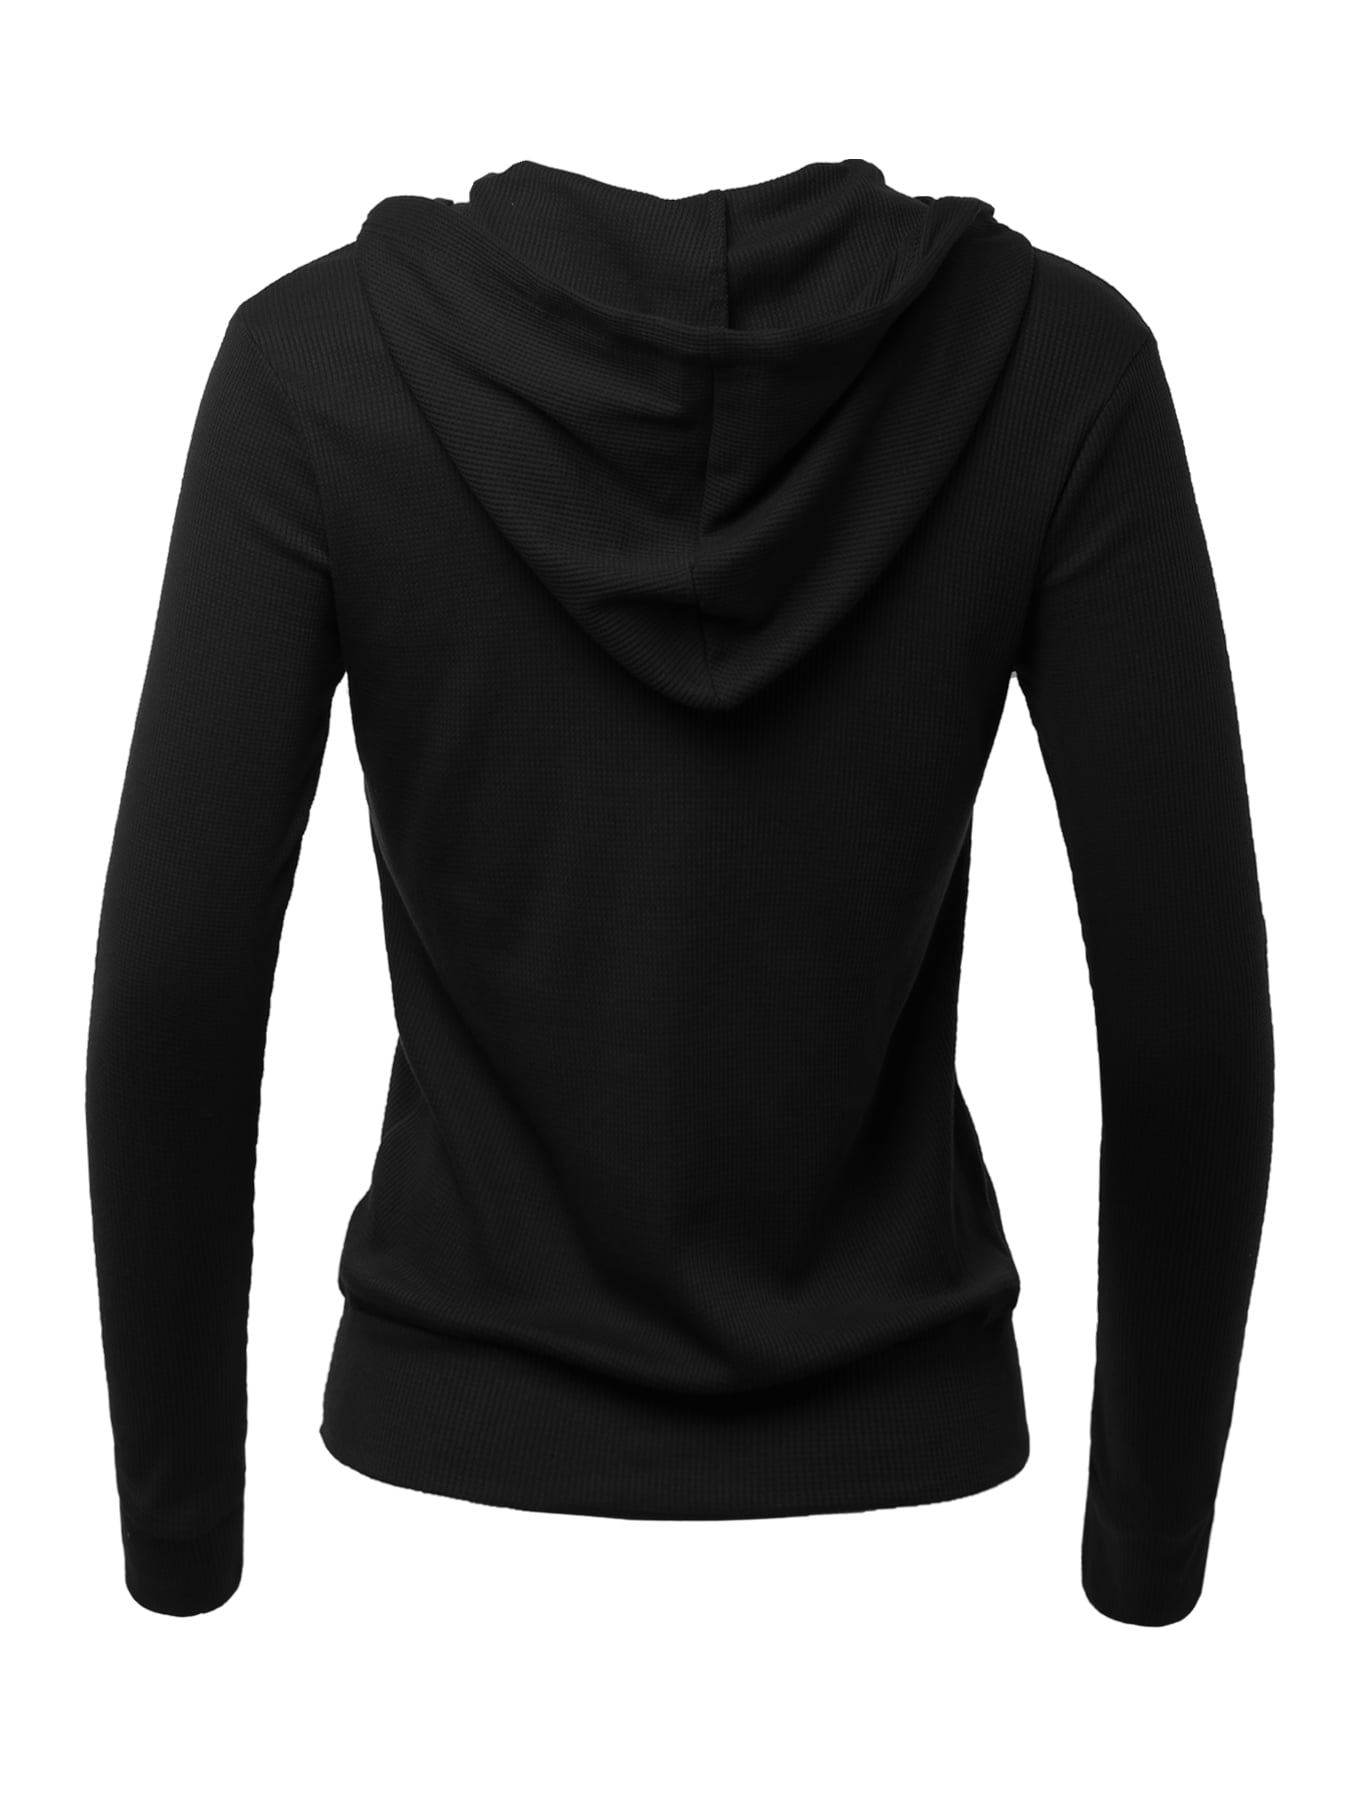 A2Y Womens Casual Lightweight Fitted Zip Up Thermal Hoodie with Drawstring